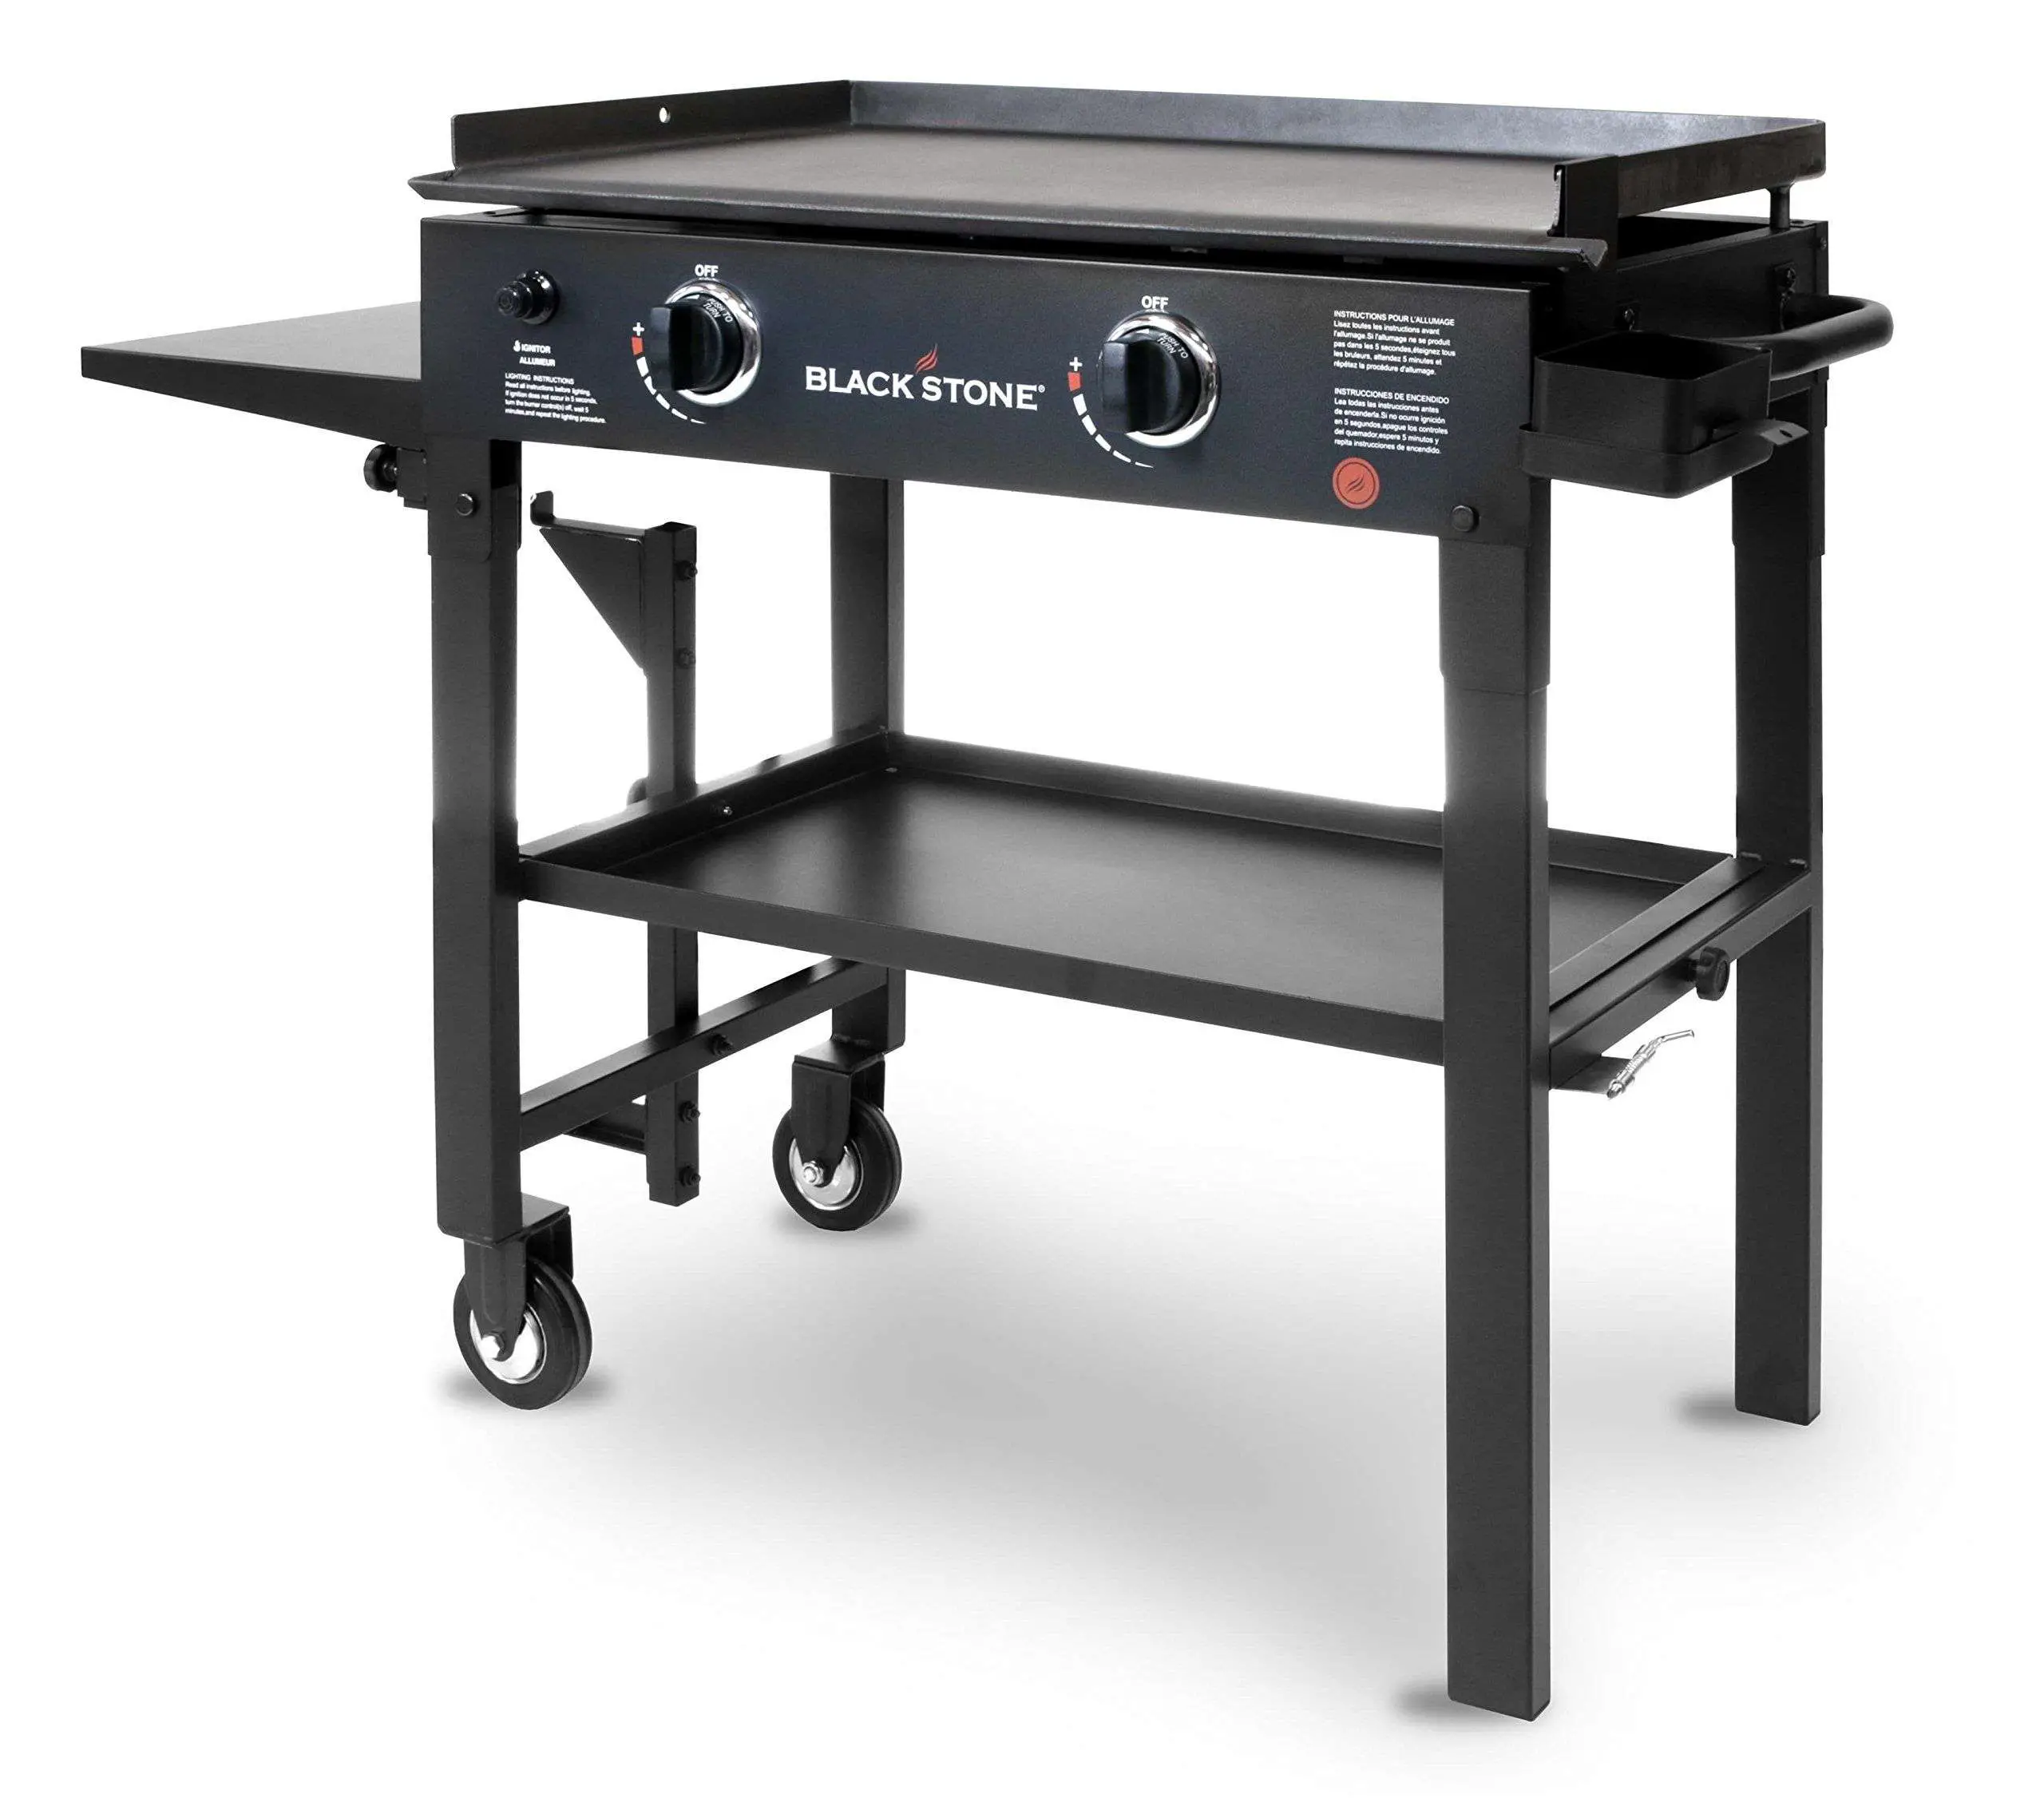 Blackstone 28 inch Outdoor Flat Top Gas Grill Griddle Station